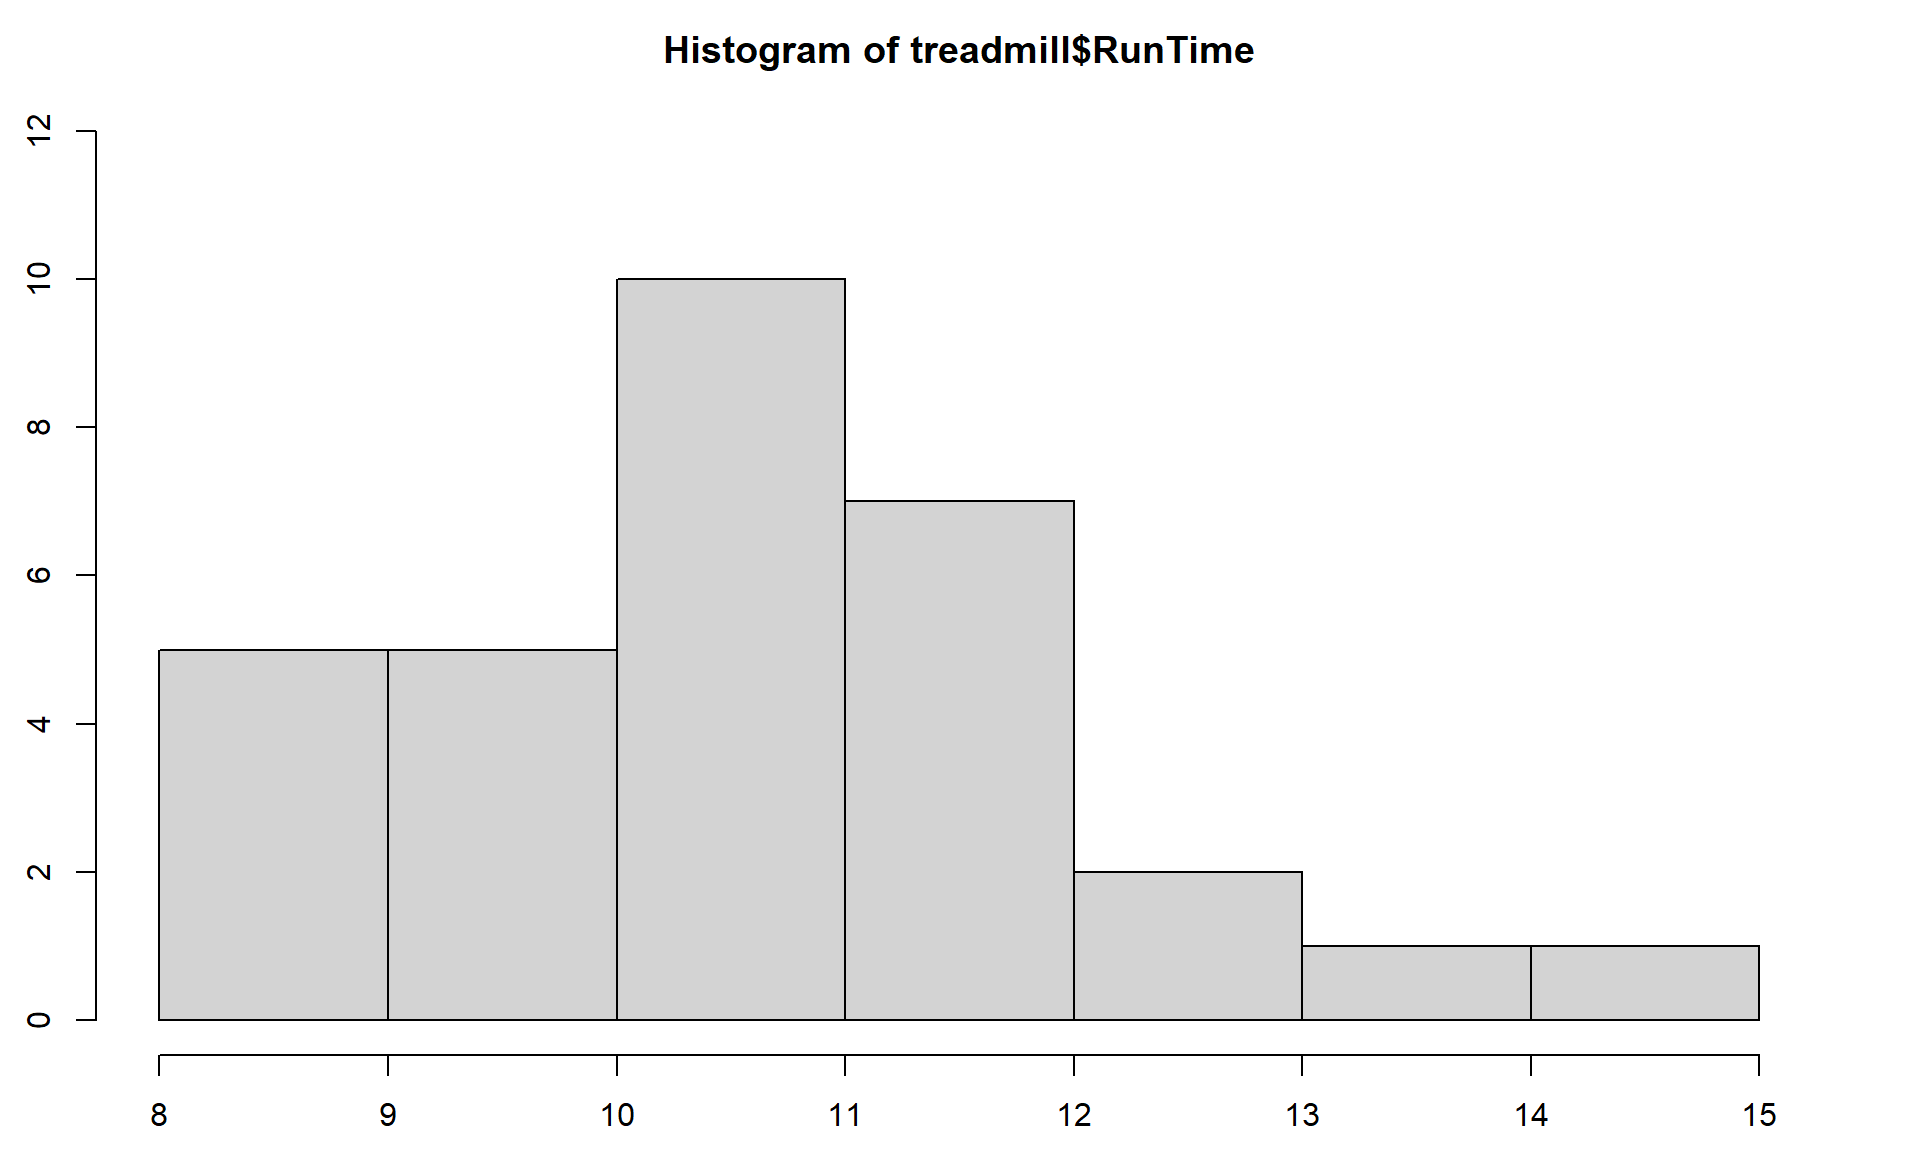 Histogram of Run Times (minutes) of \(n\) = 31 subjects in Treadmill study, bar heights are counts.